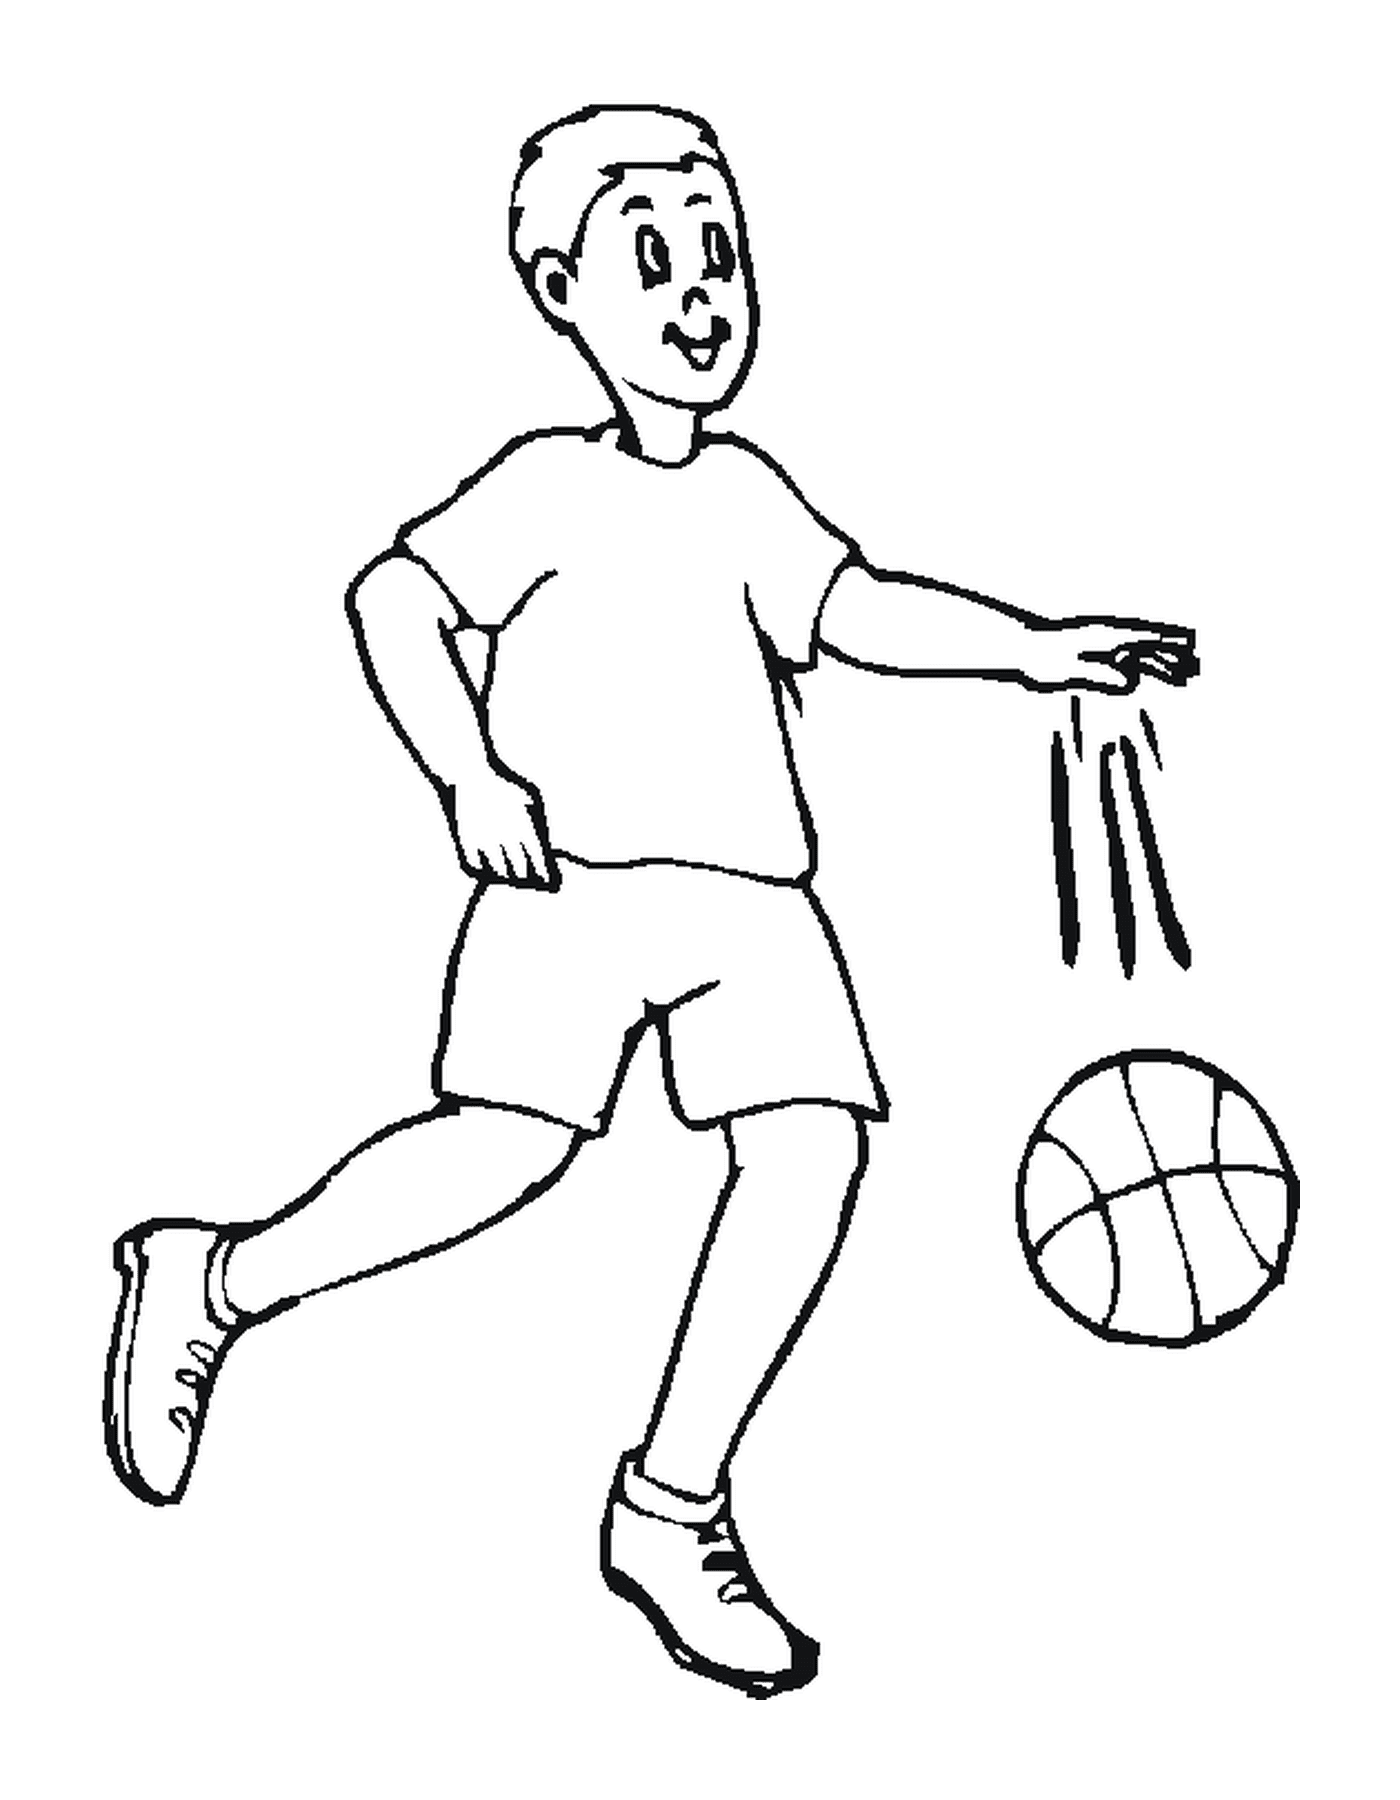  A dribble player 